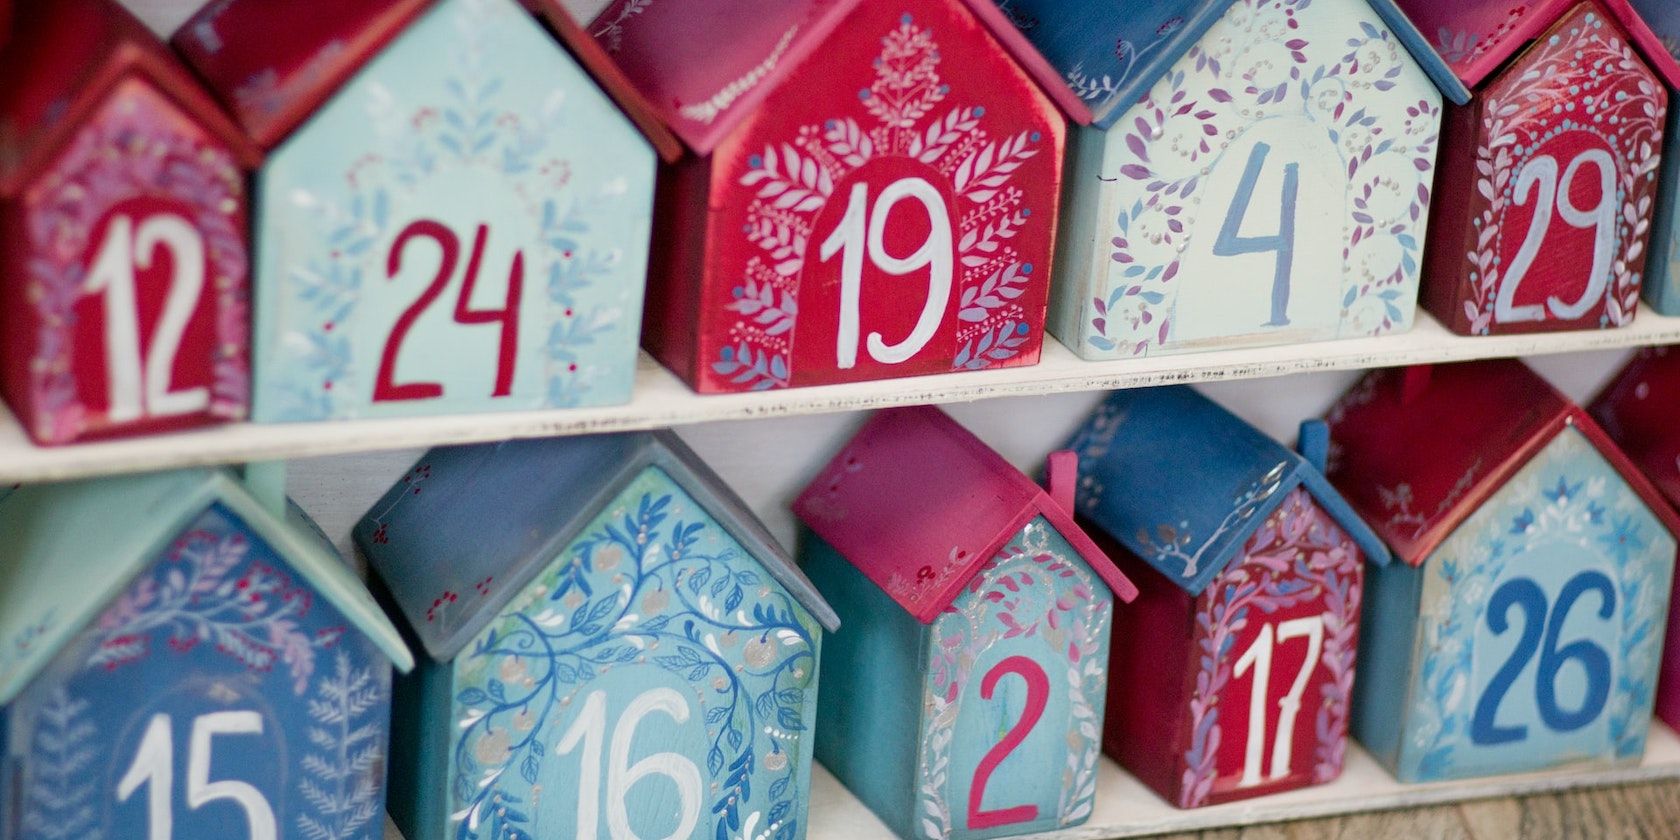 An advent calendar made from numbered wooden boxes painted red and blue.